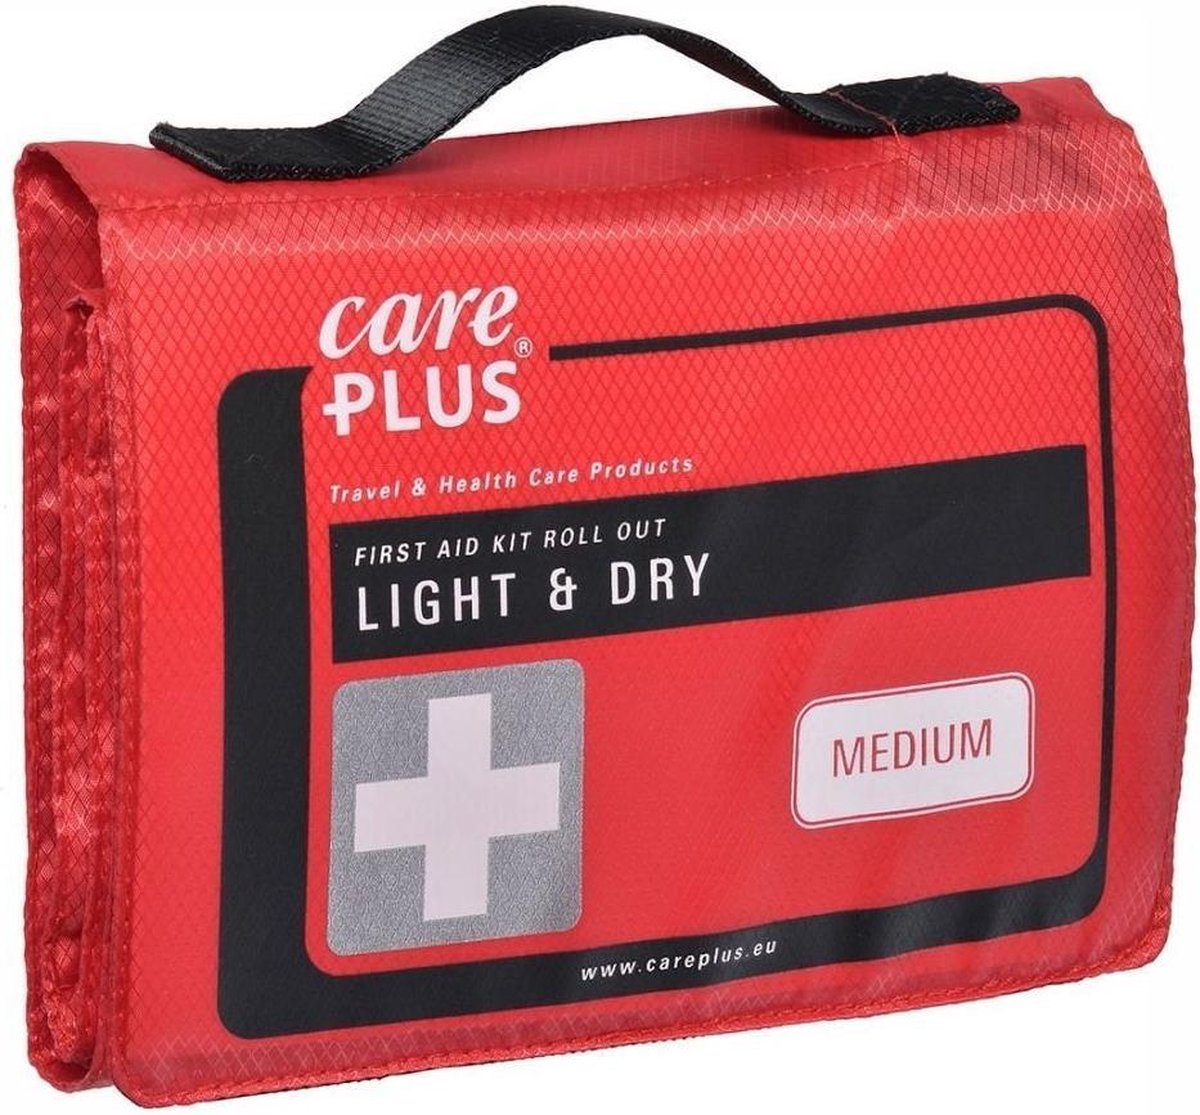 Careplus First Aid Roll Out - Light & Dry Medium